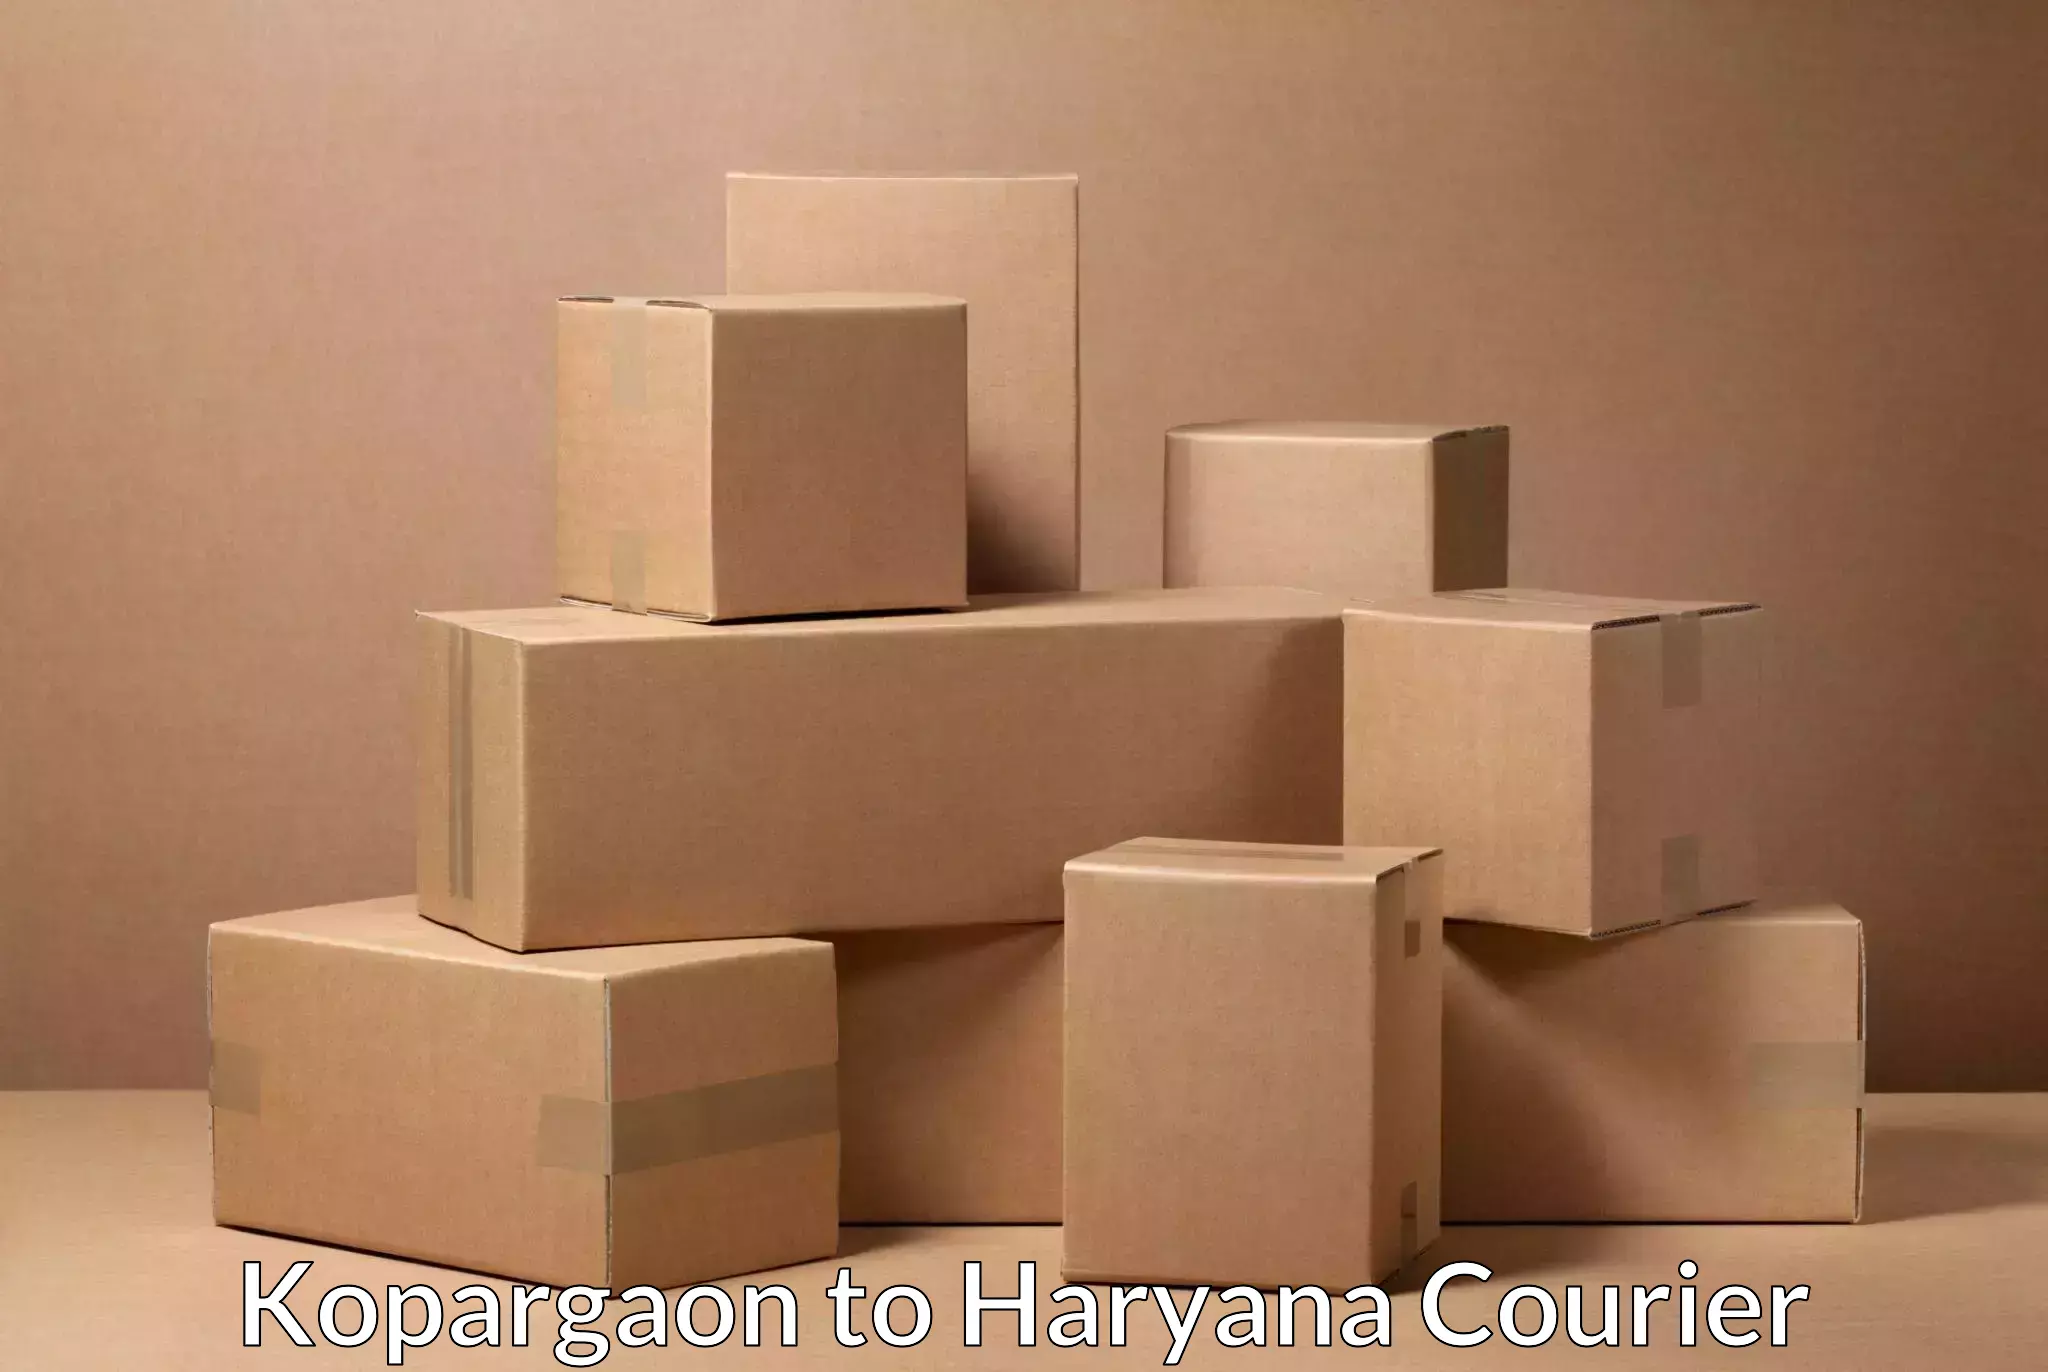 Local delivery service Kopargaon to Haryana